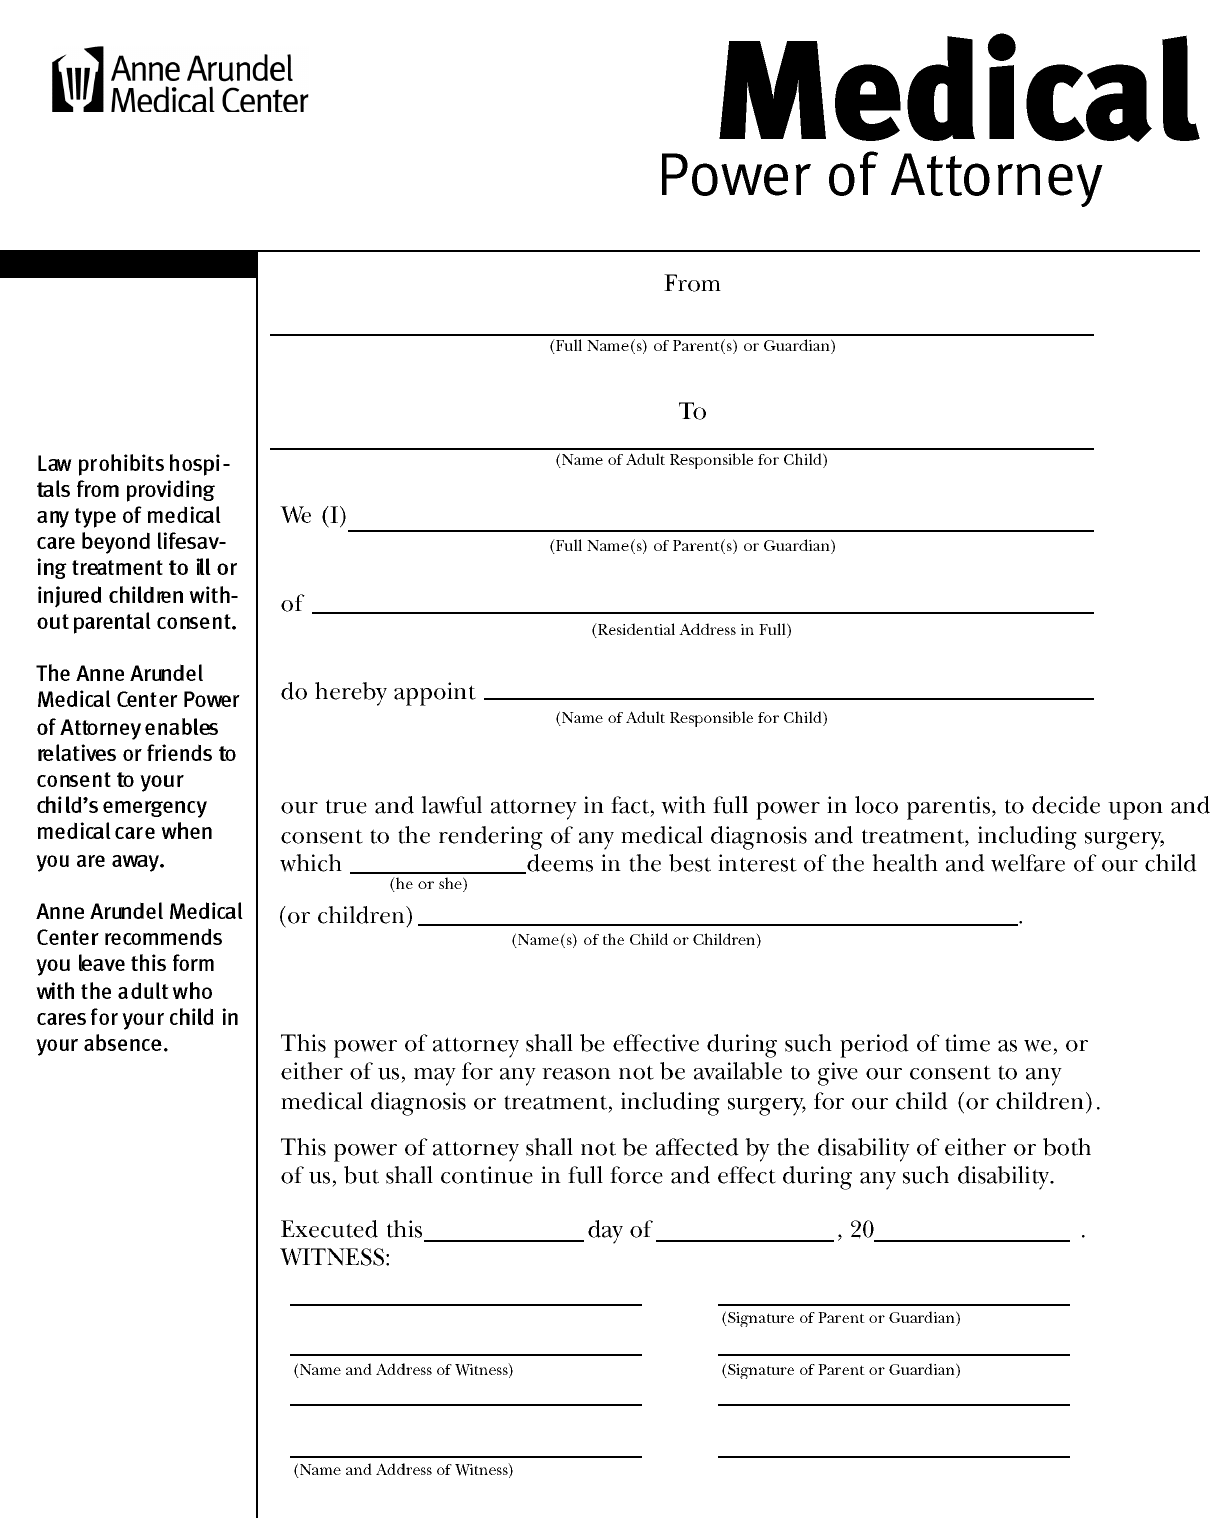 free-maryland-medical-power-of-attorney-form-pdf-118kb-1-page-s